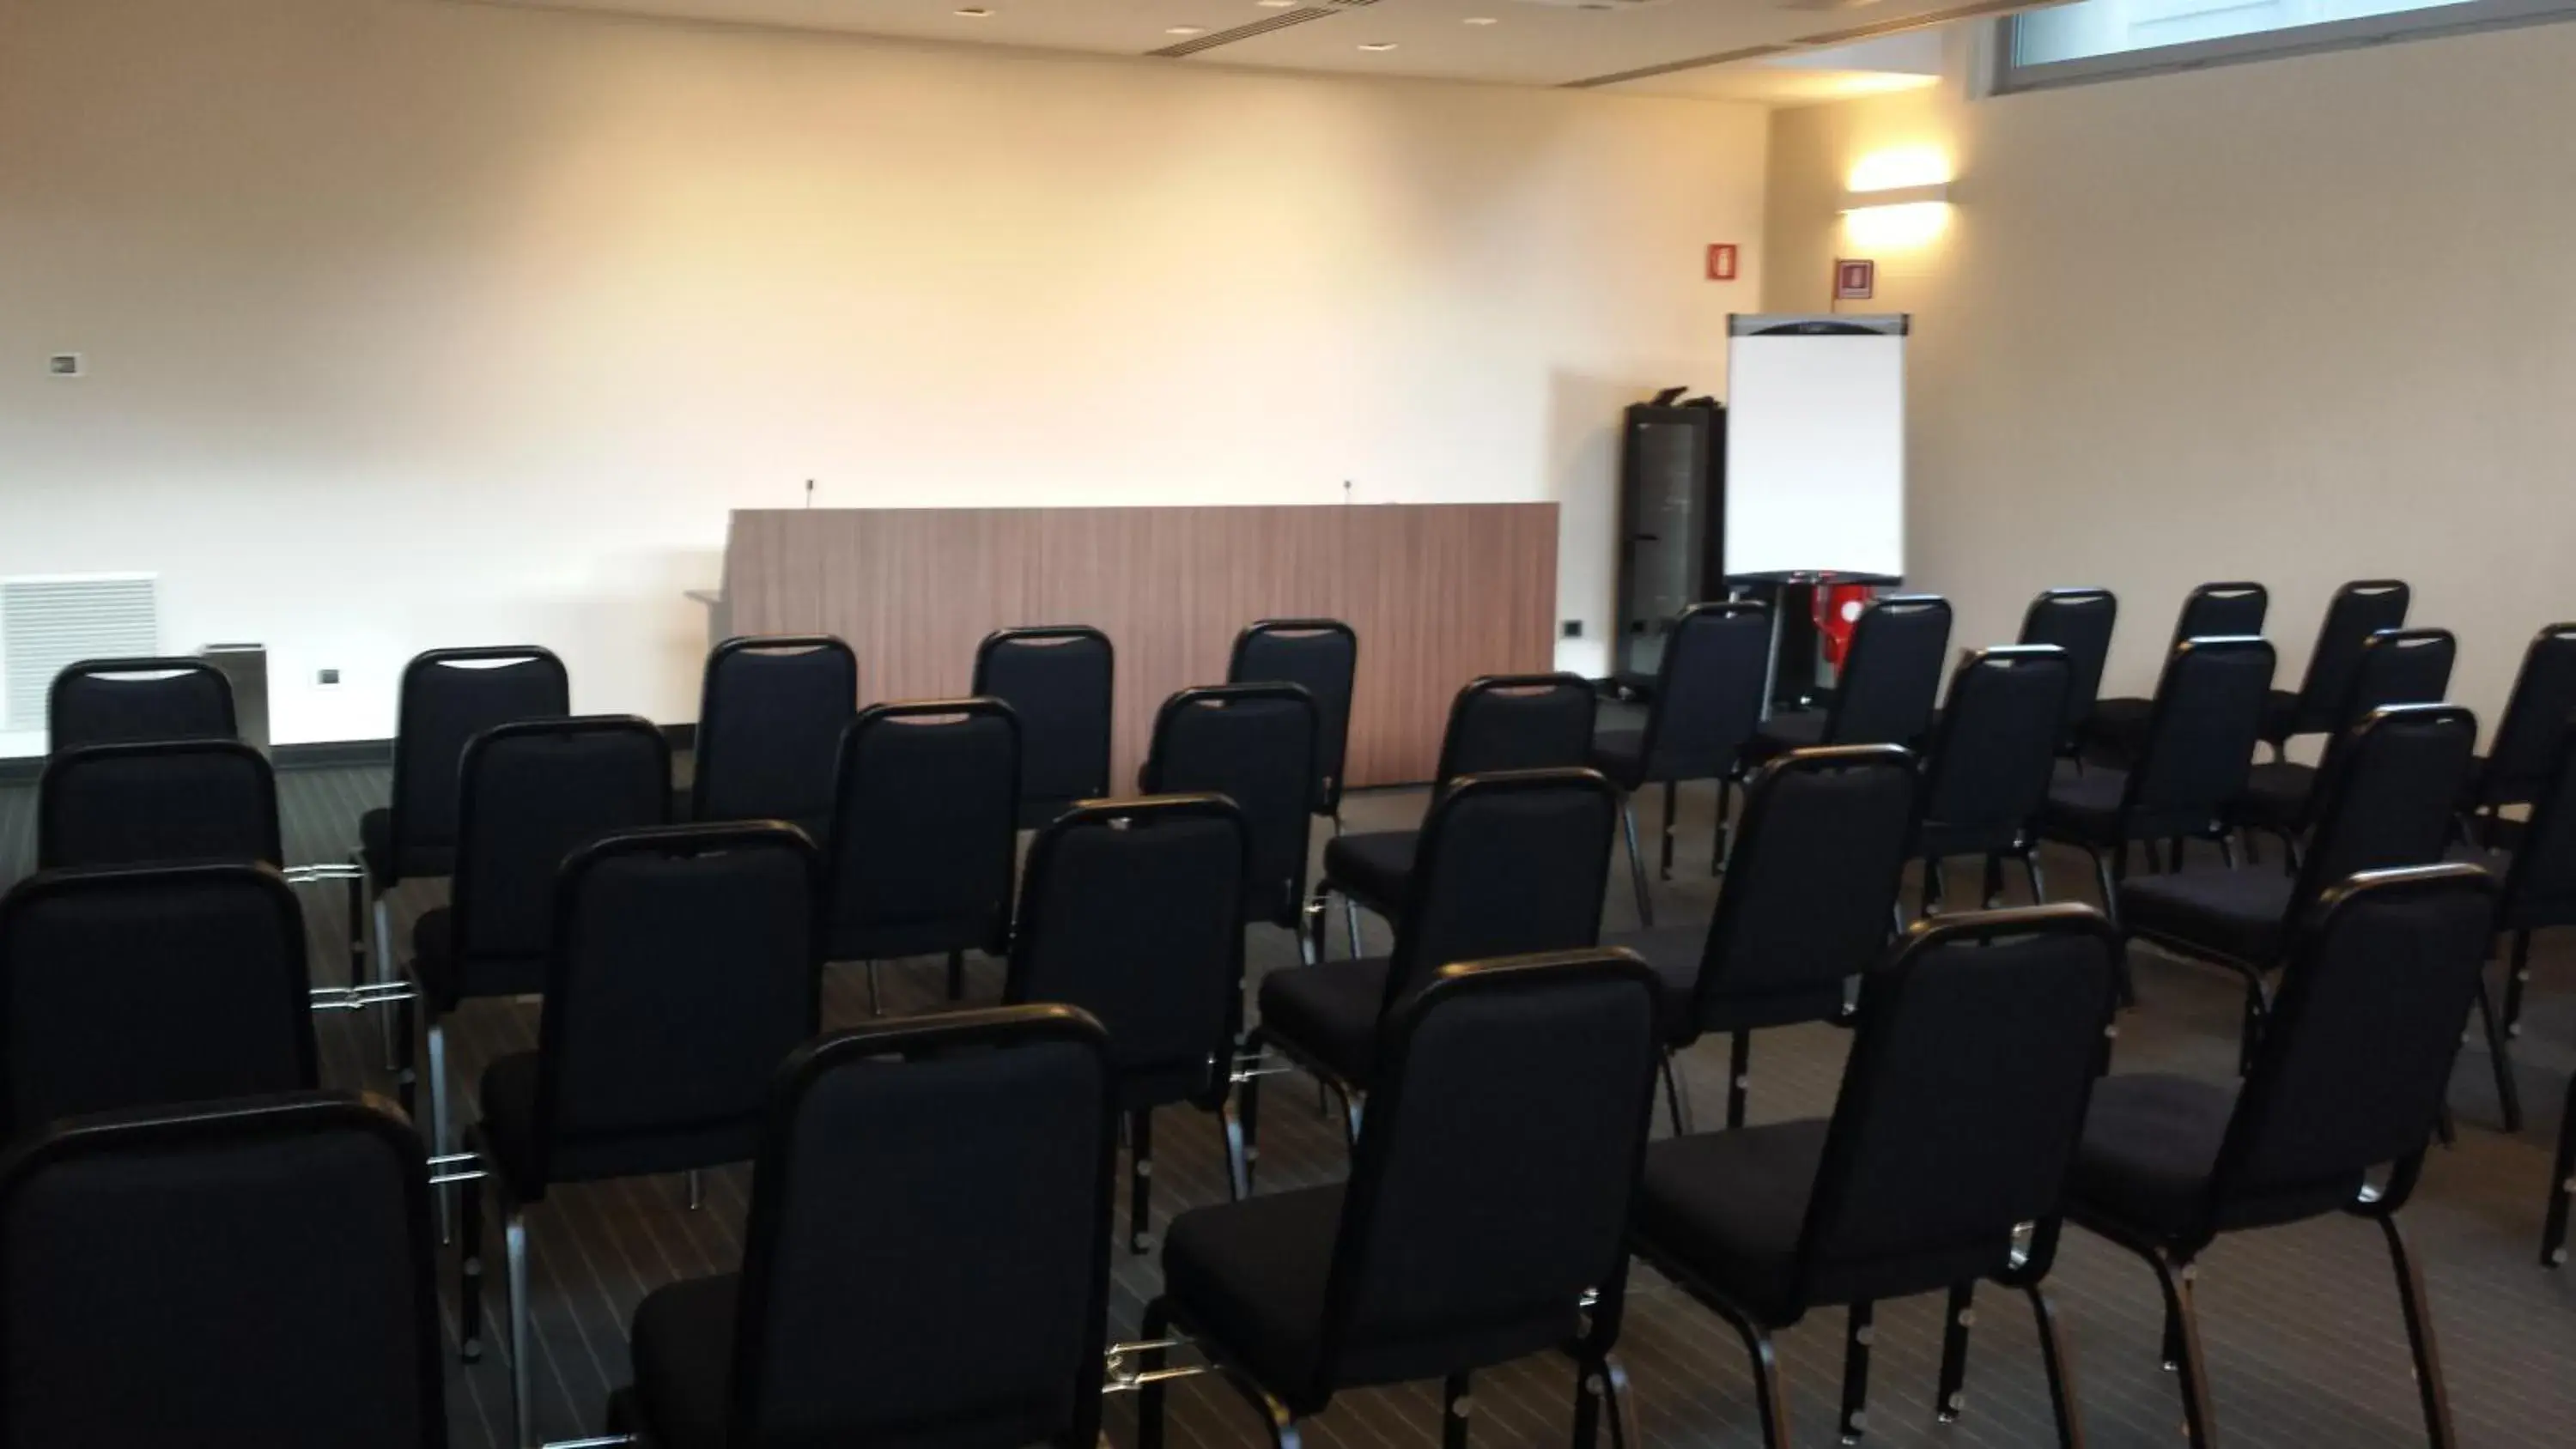 Business facilities in Best Western Premier Hotel Monza E Brianza Palace